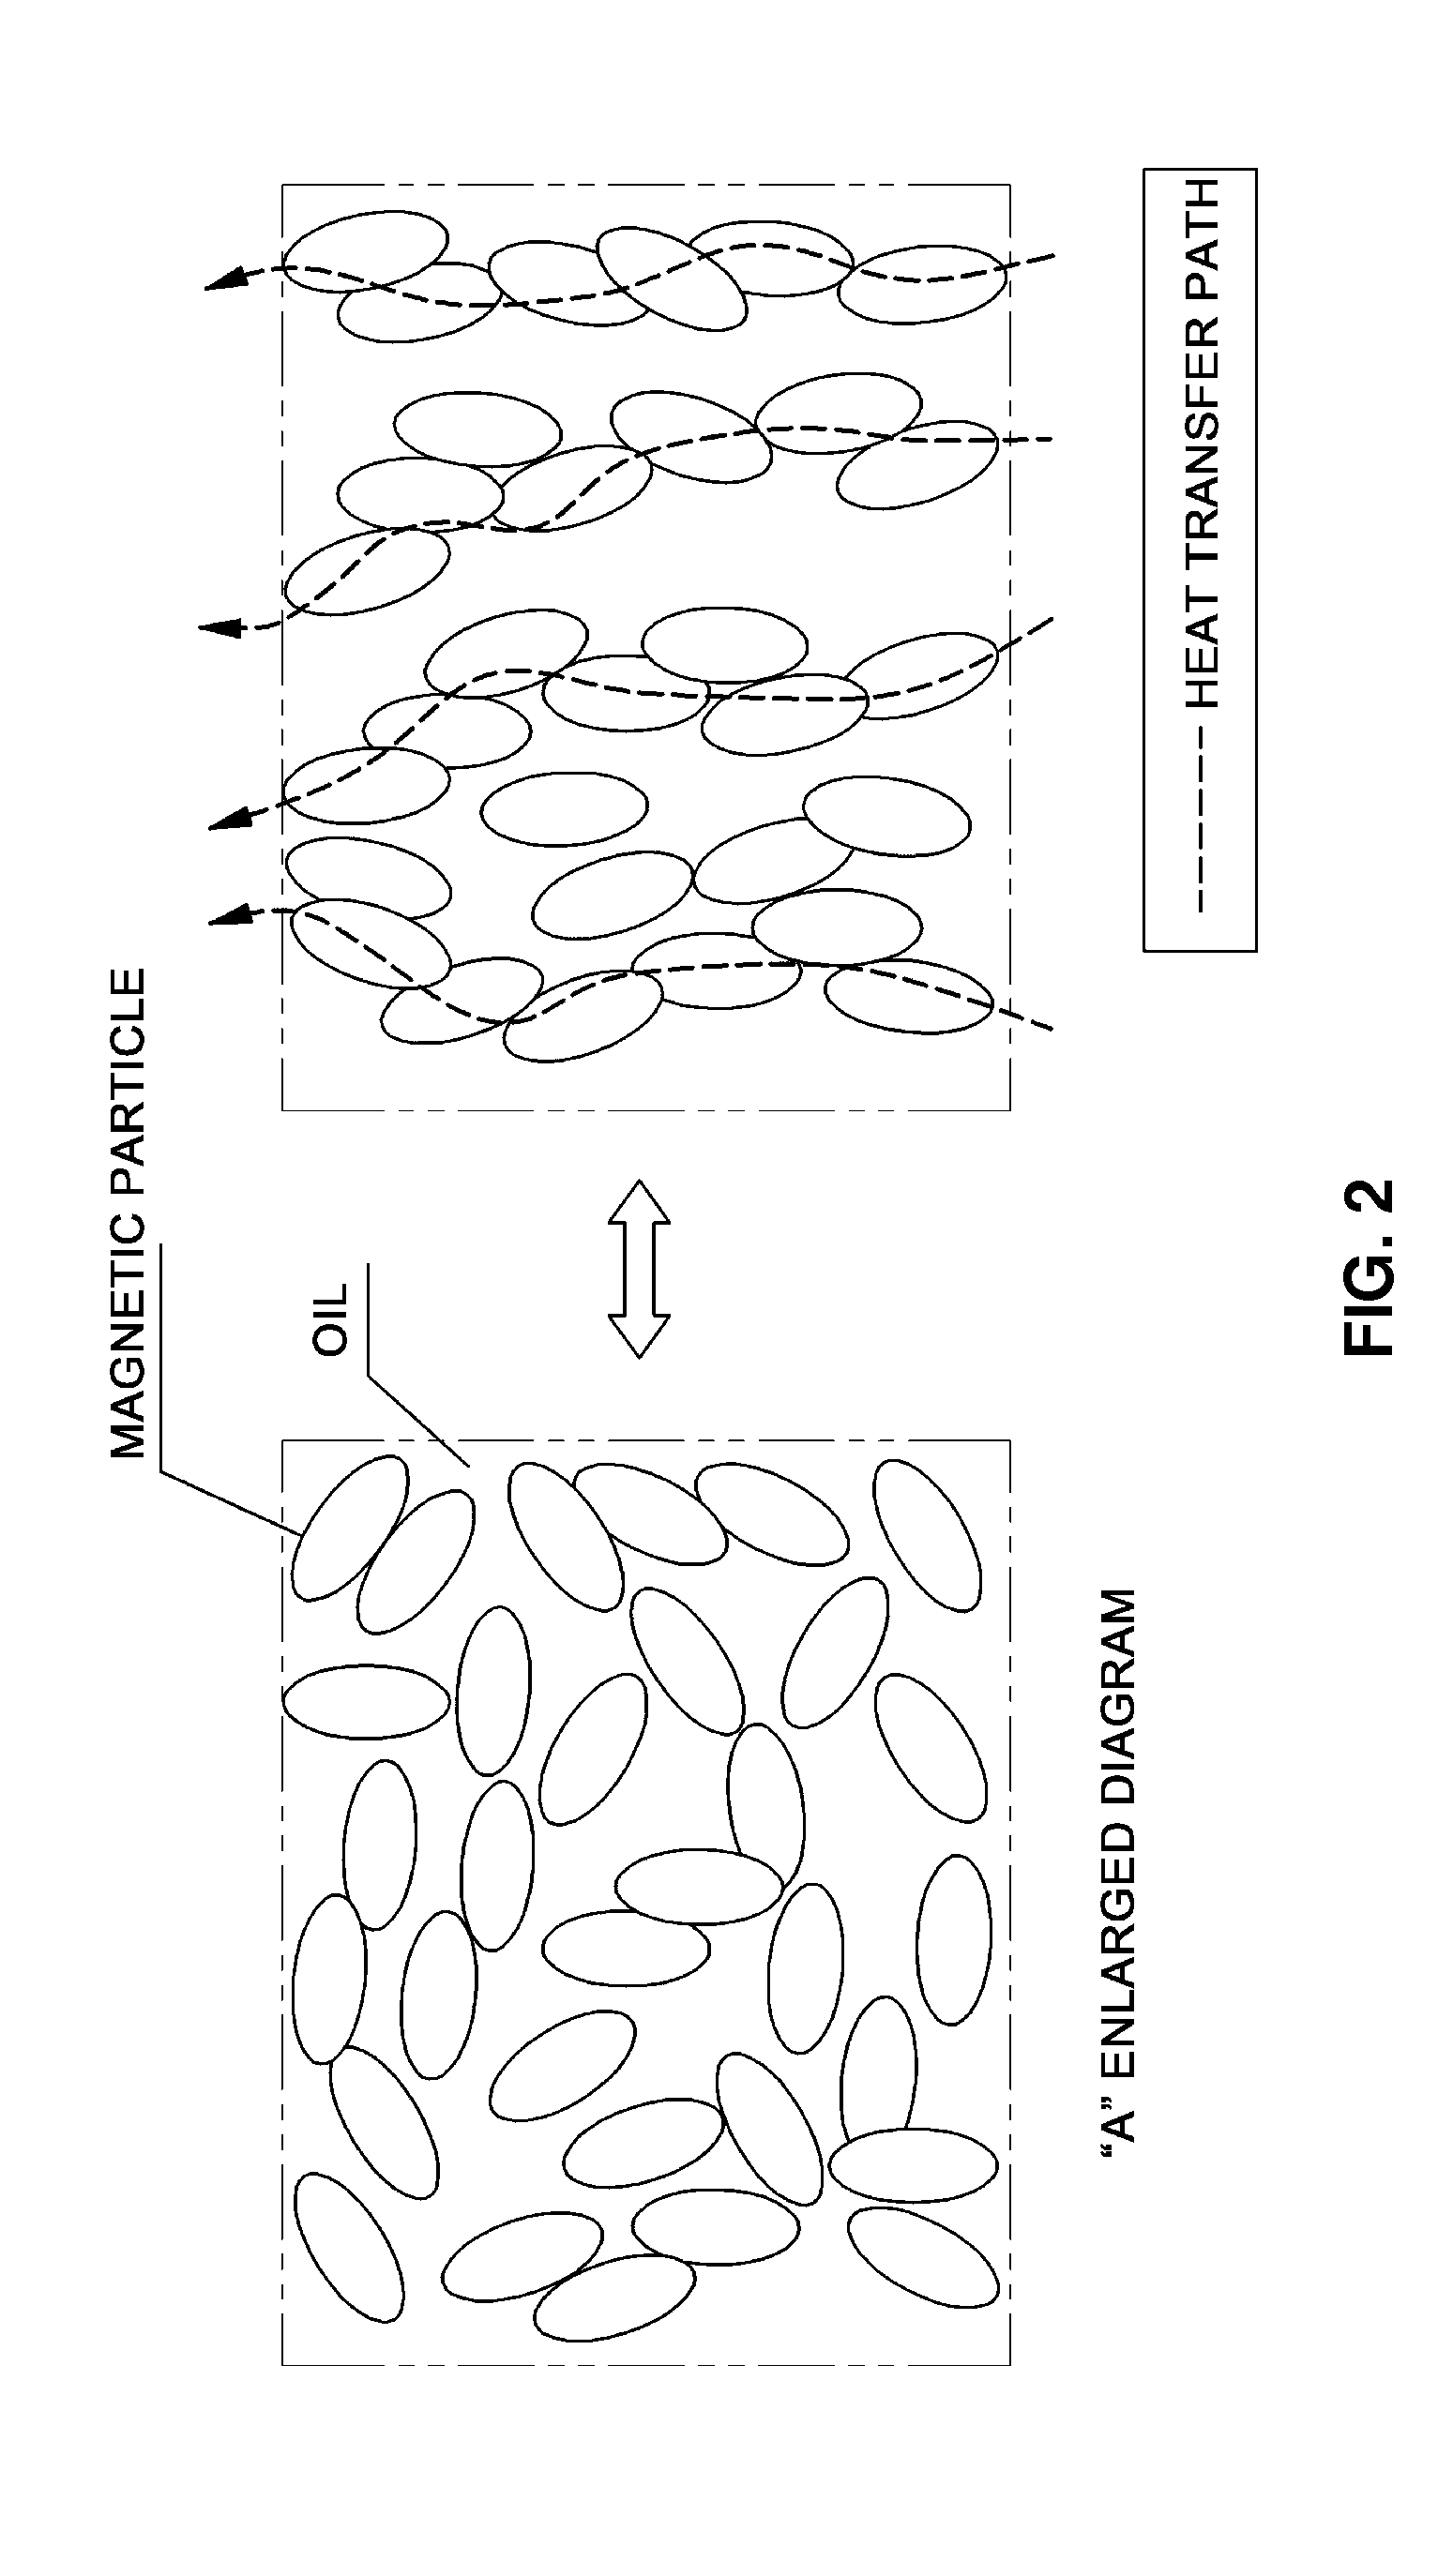 Structure for power electronic parts housing of vehicle